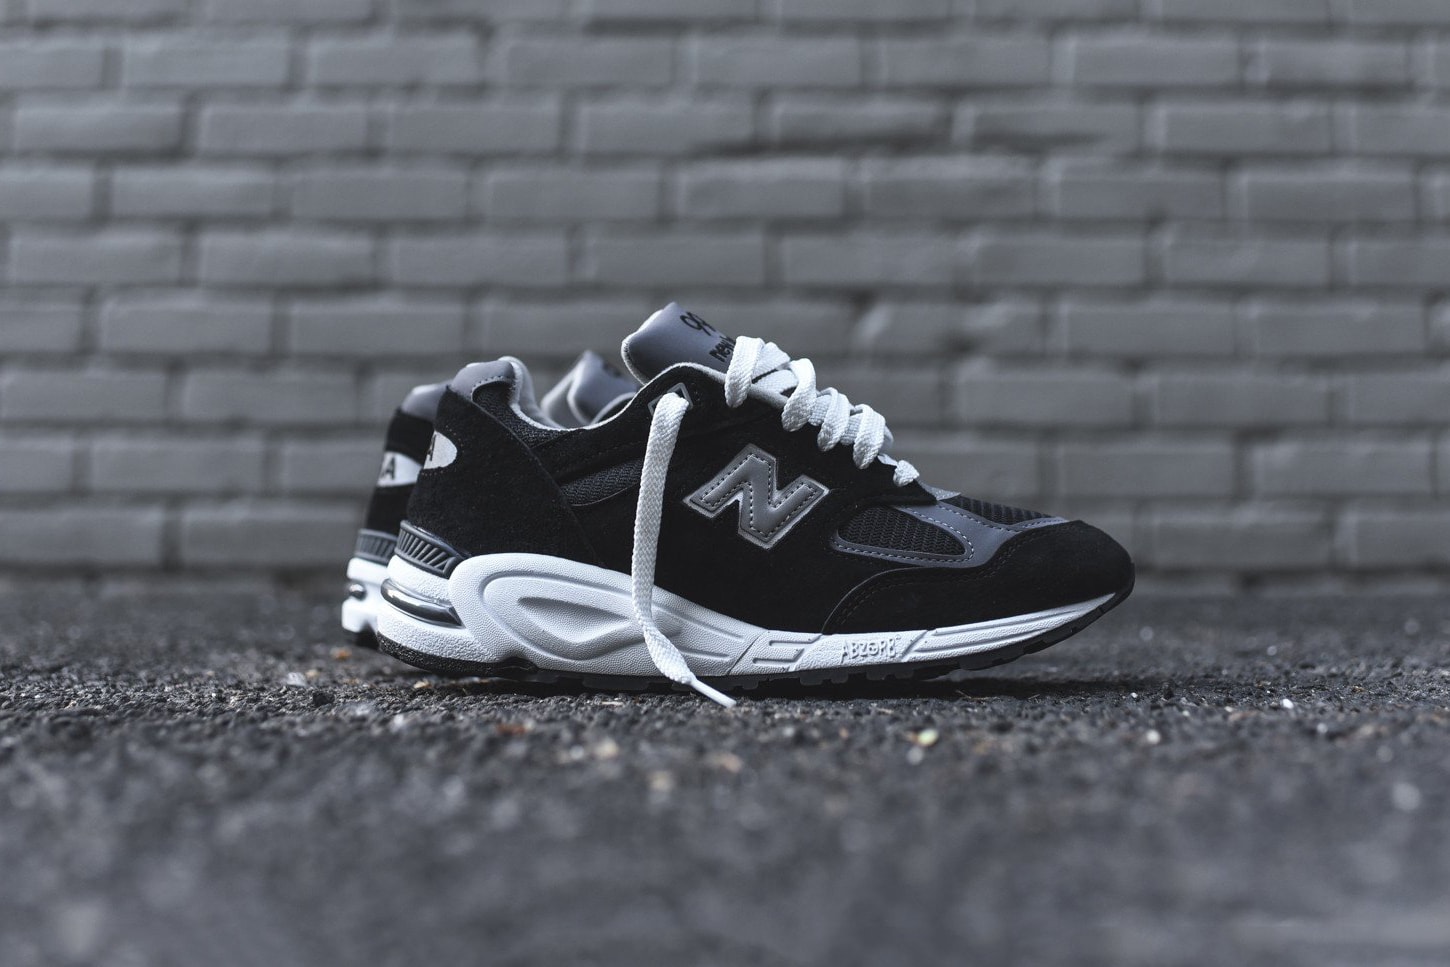 Ronnie Fieg Kith New Balance 991 990 993 996 997 998 Grey Navy Purple Brown Black White Archive Sneaker Trainer Silhouette Shoe Footwear Sale Curated Collection Capsule Release Information Vintage Dad Shoe